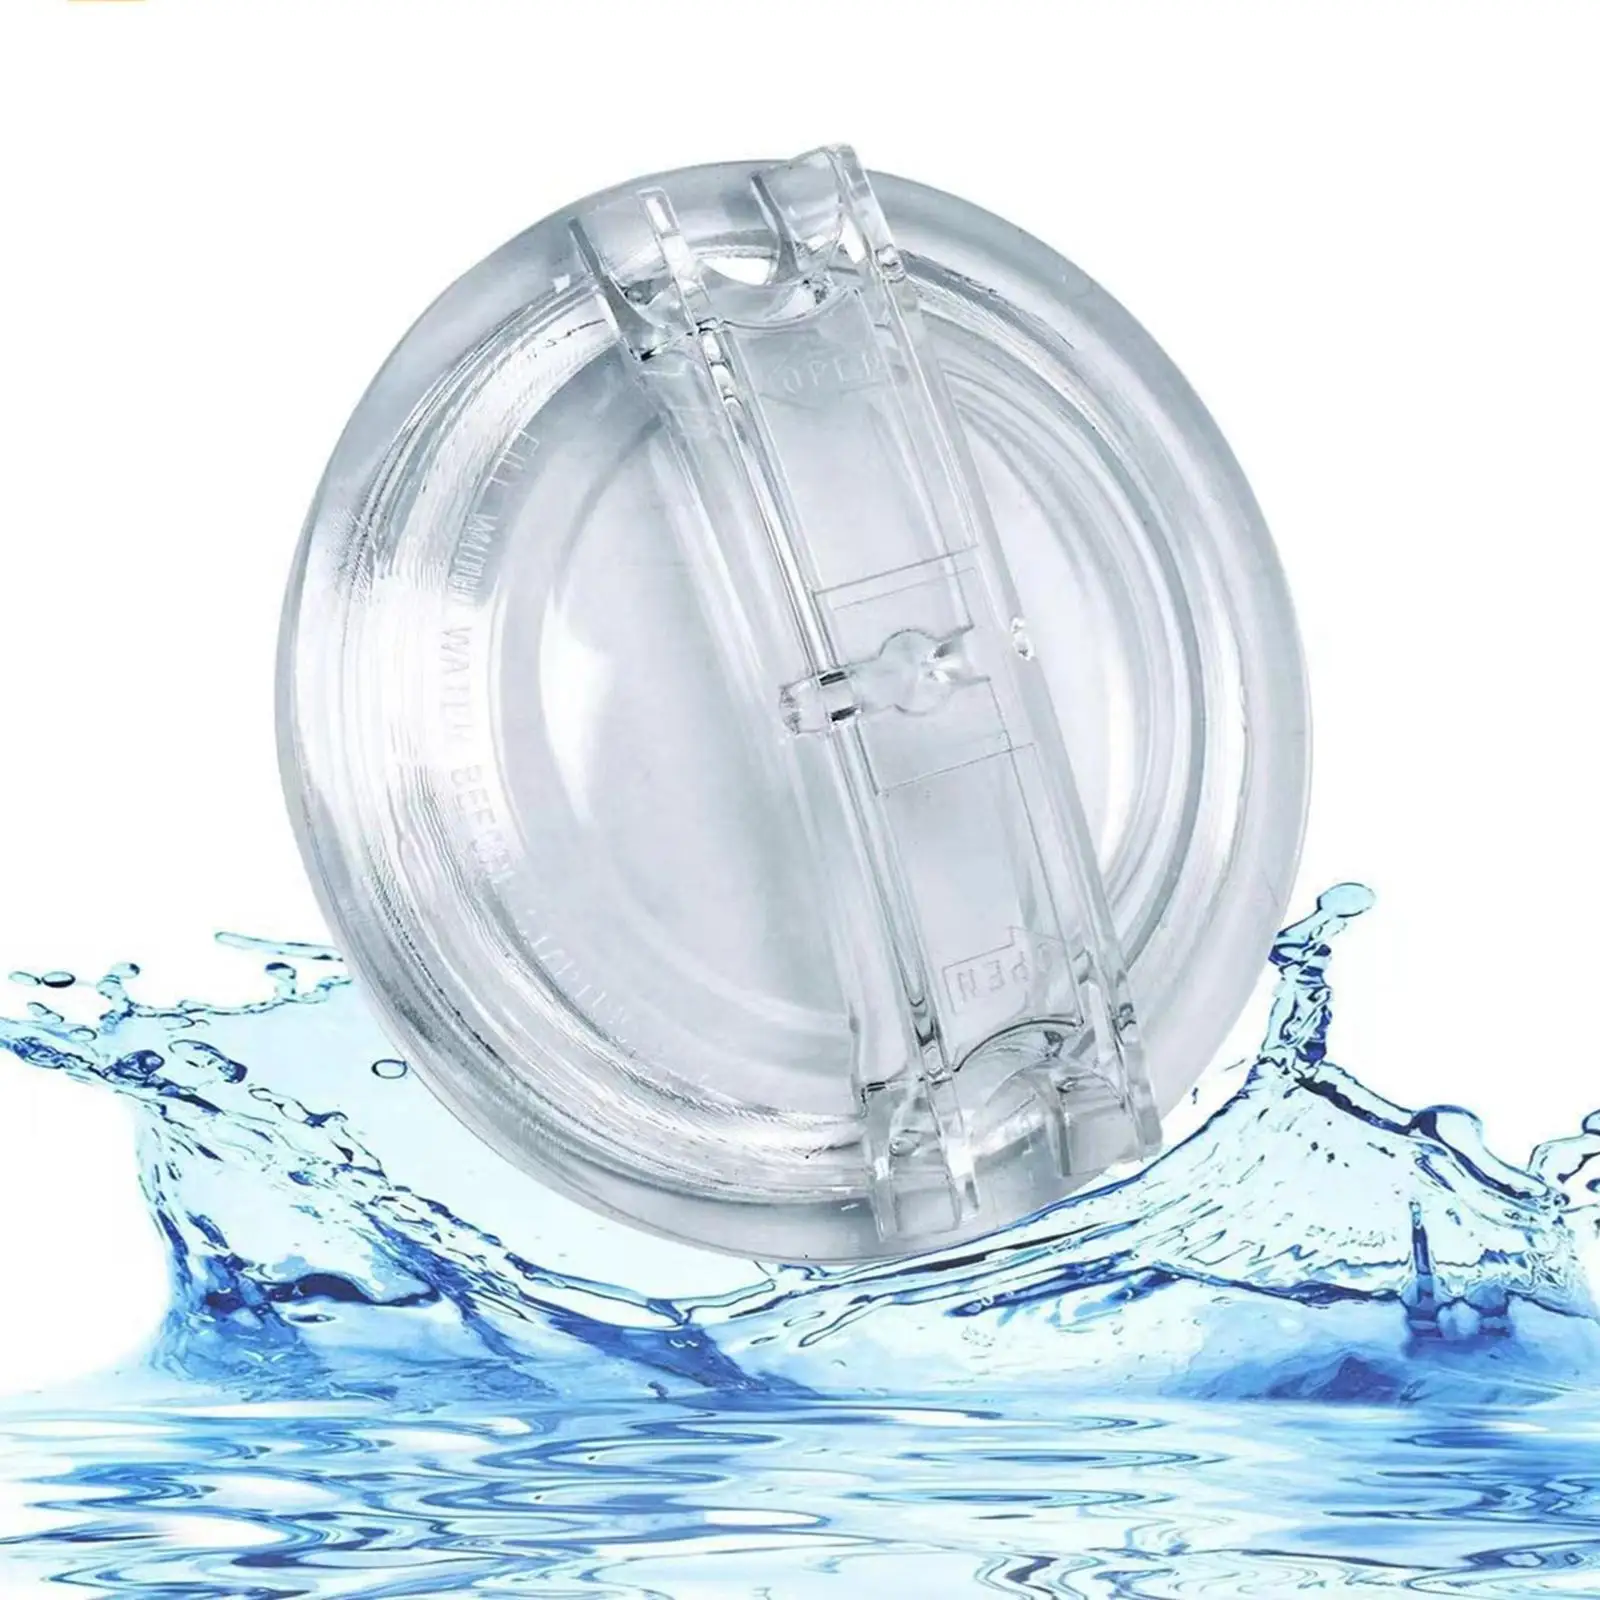 Threaded Strainer Lid Cover Pool Pump Accessory Universal 5.24``inner Pool Pump Sand Filter Strainer Cover for SP3020 SP3010